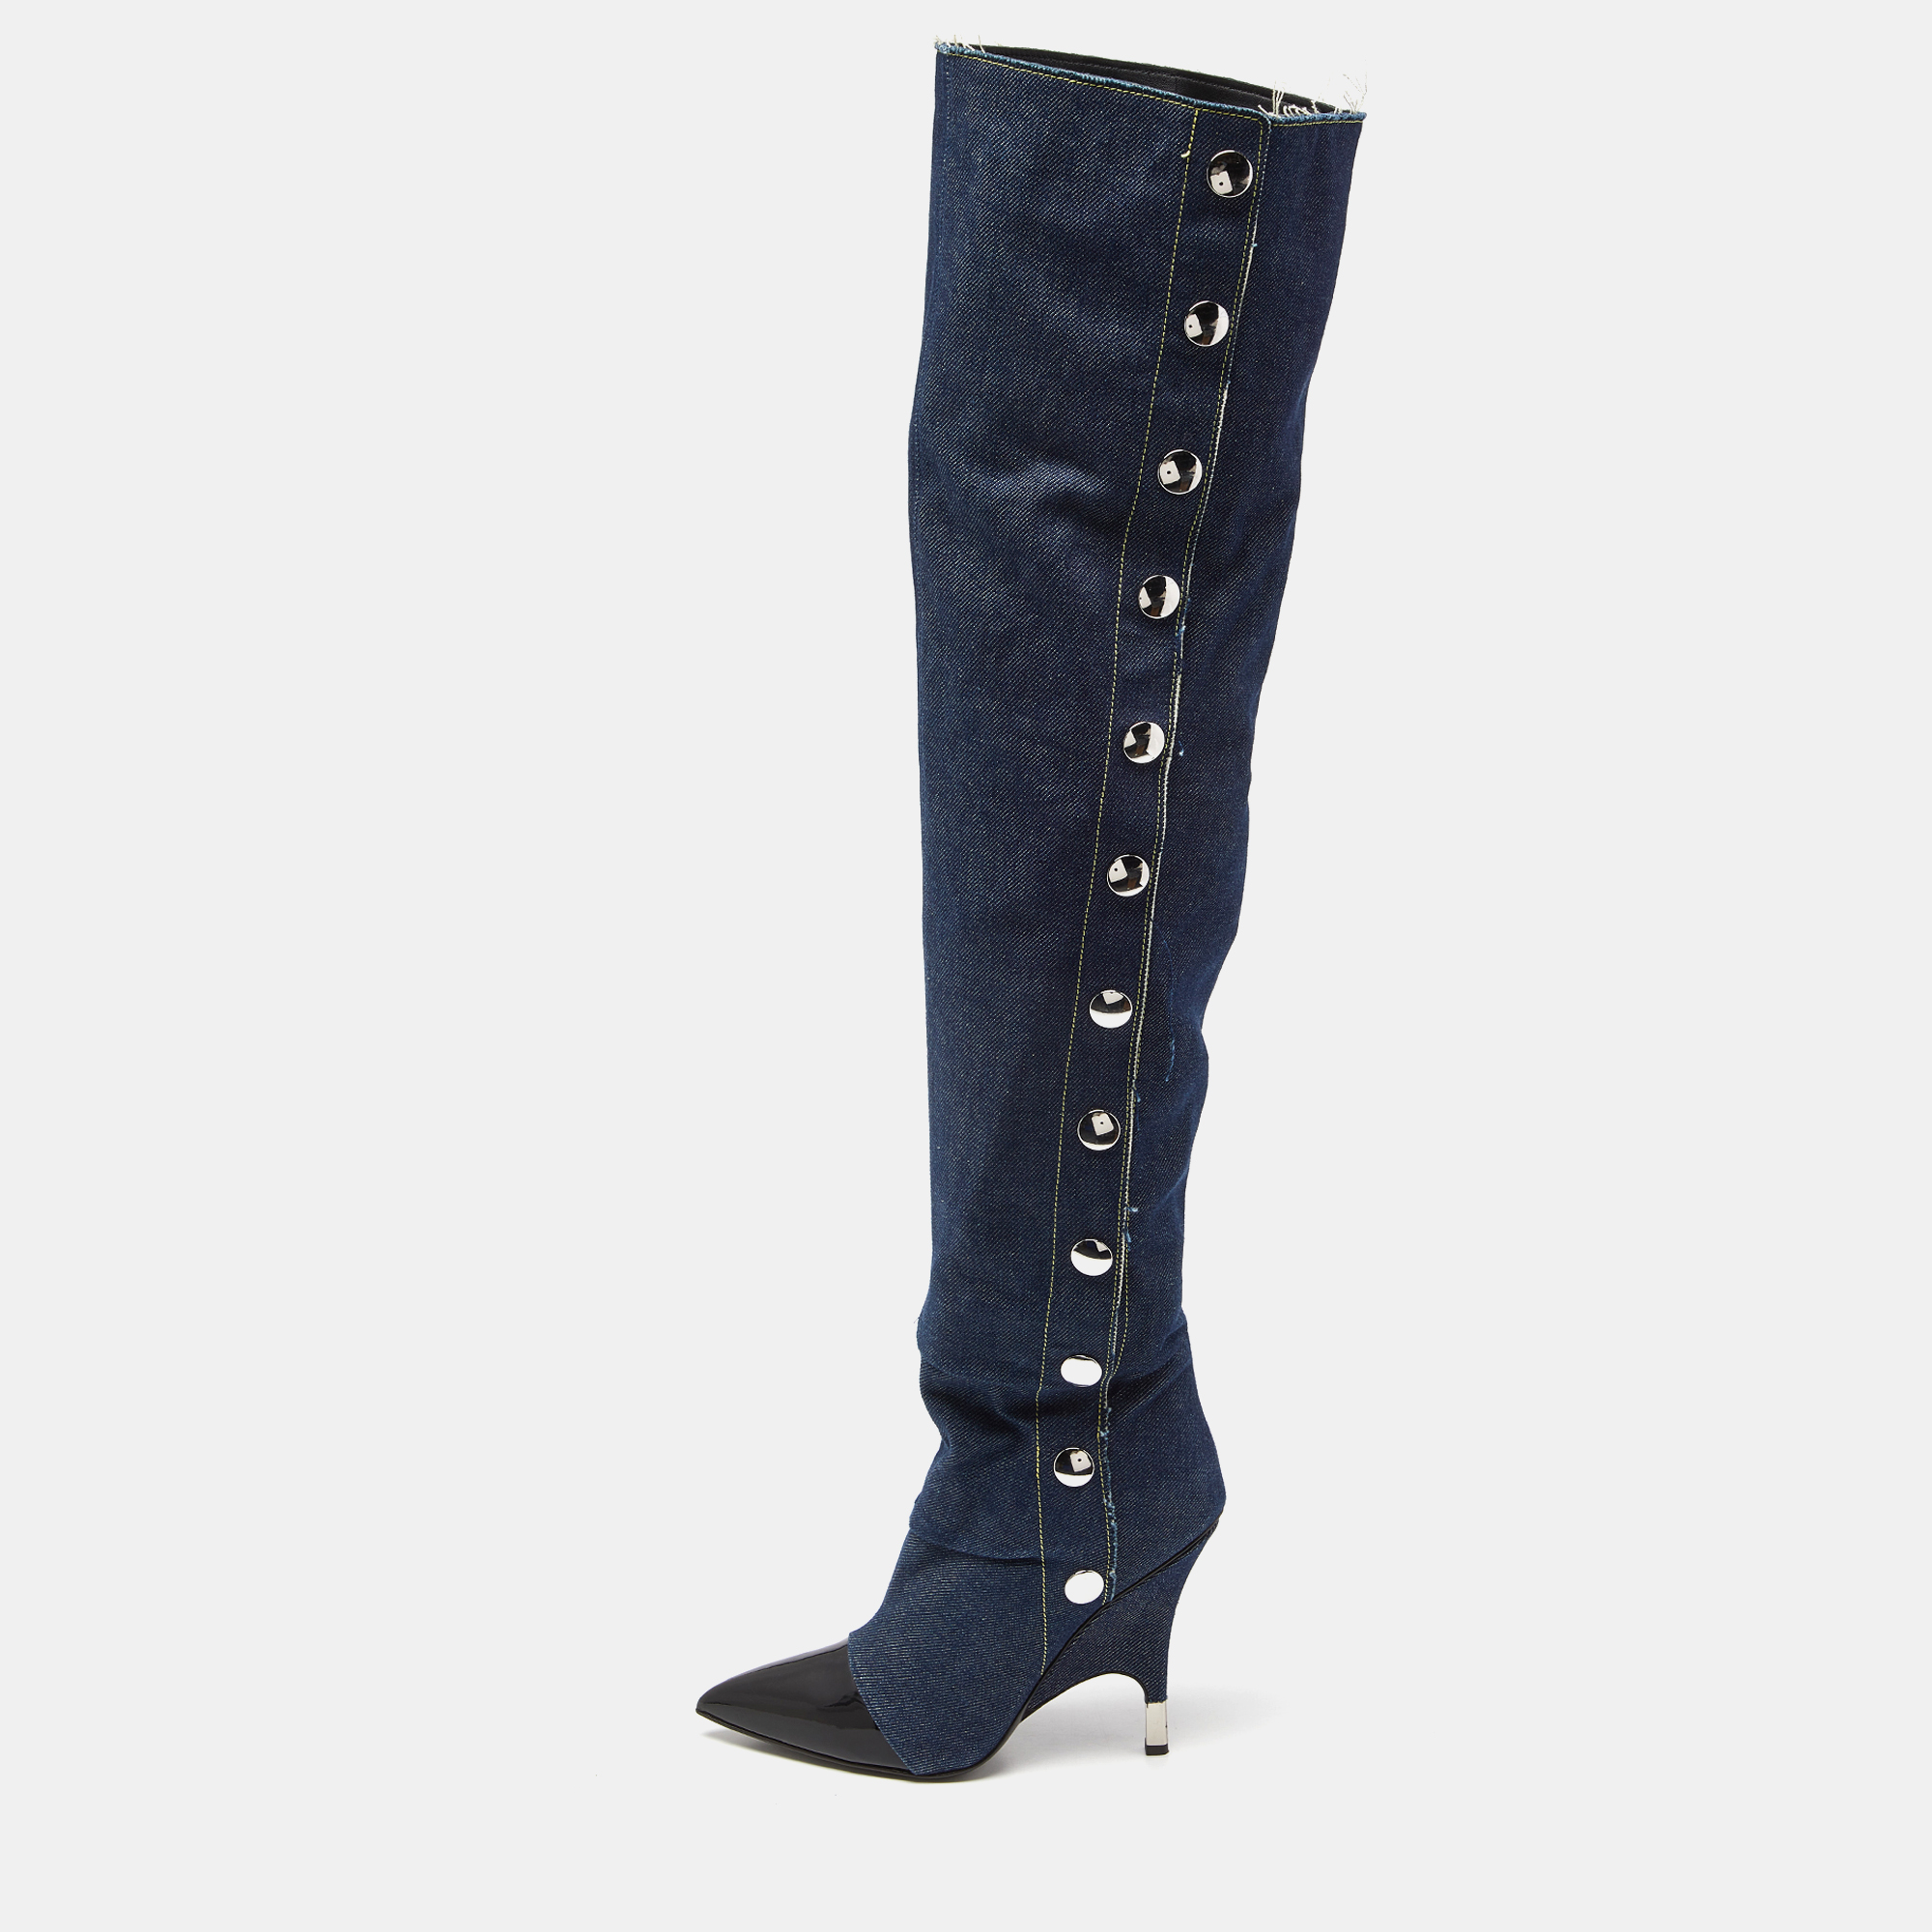 Blue/ And Patent Leather Over The Knee Length Boots